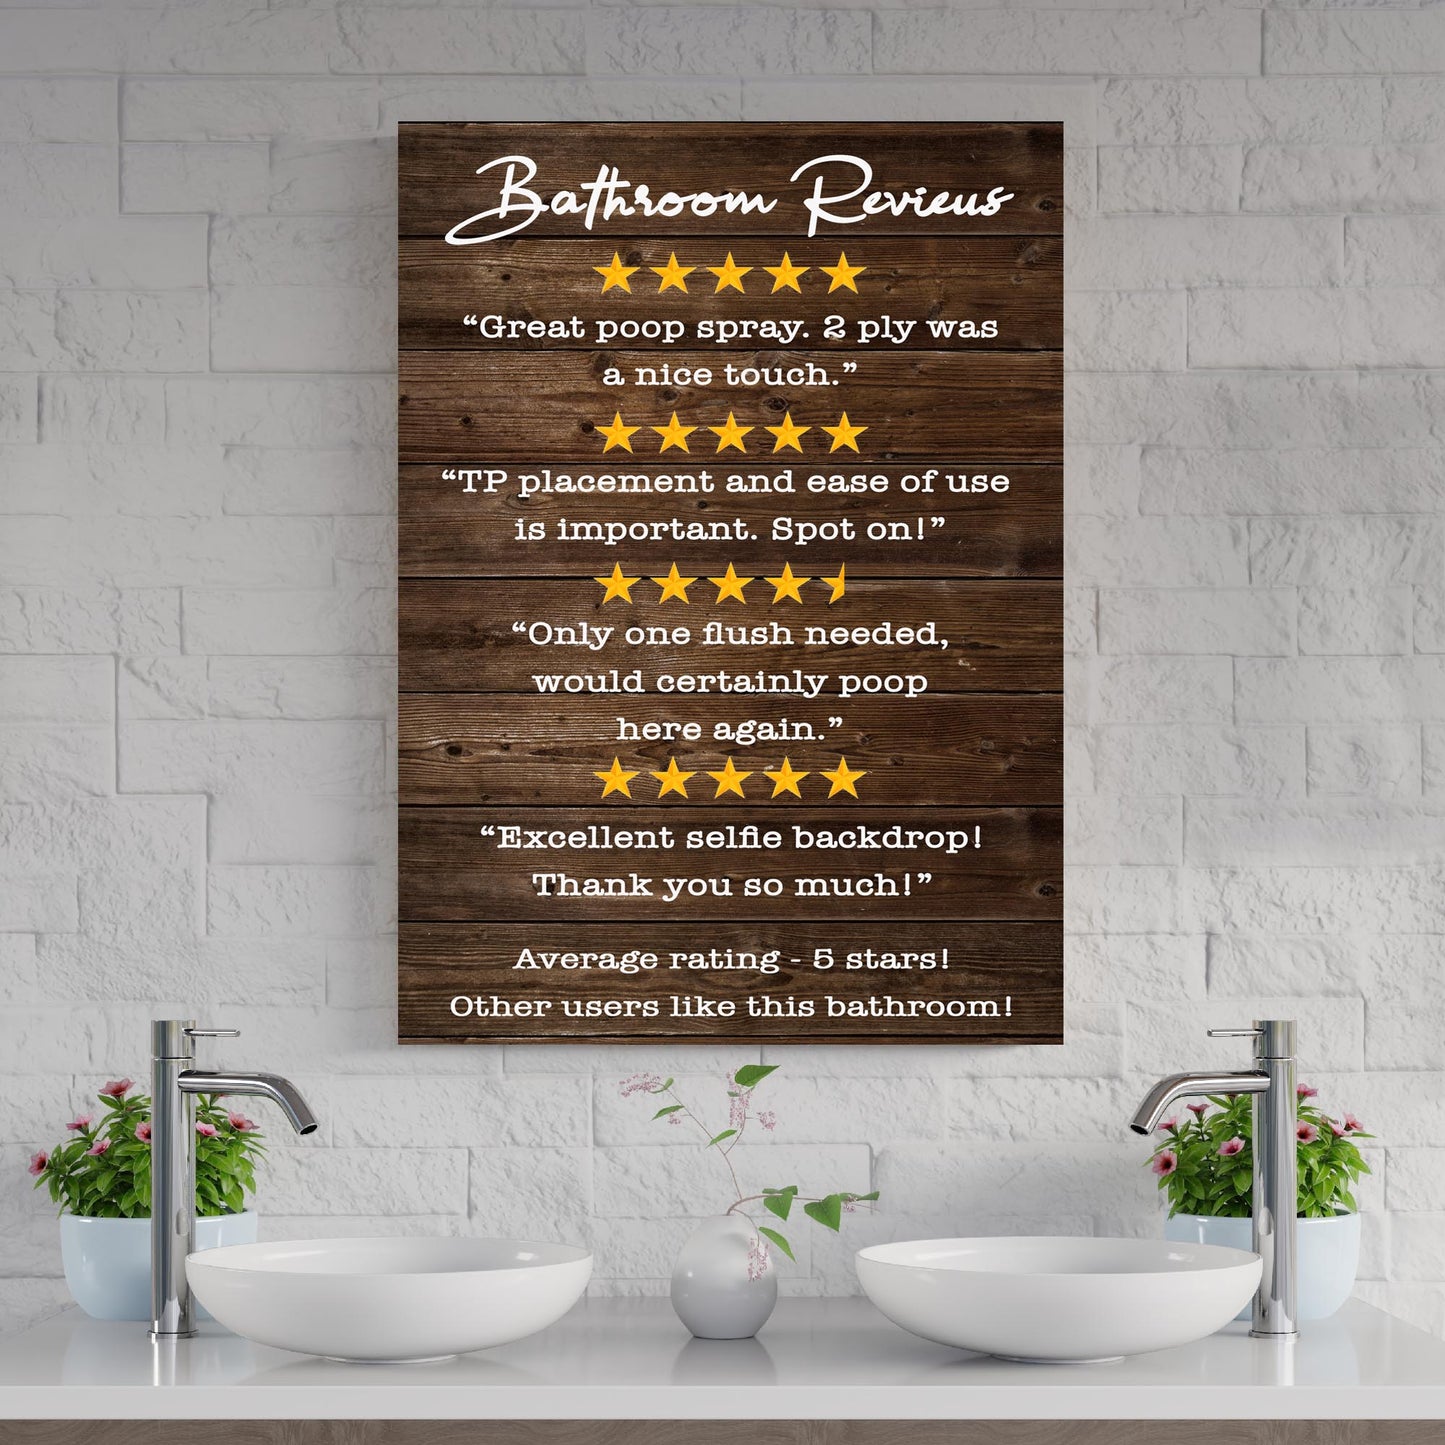 Bathroom Reviews Sign II - Image by Tailored Canvases